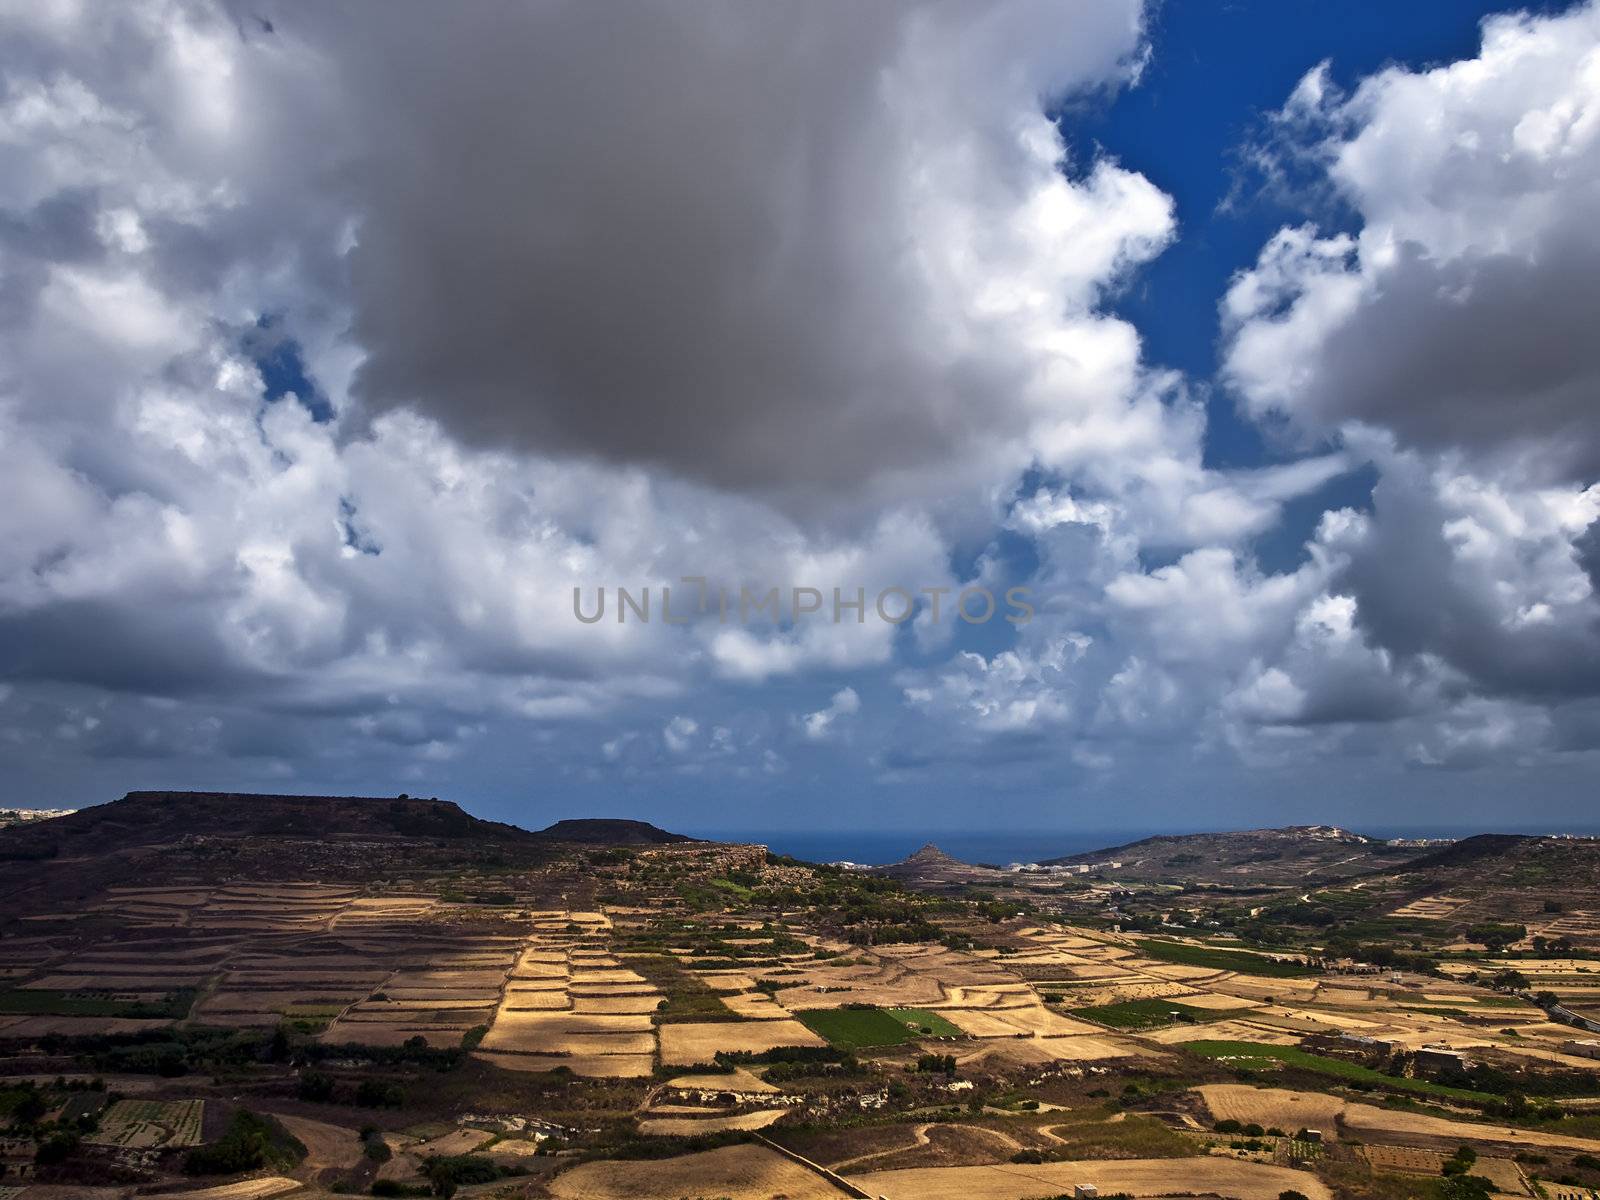 One of the many hills of Gozo as seen from the medieval Citadel